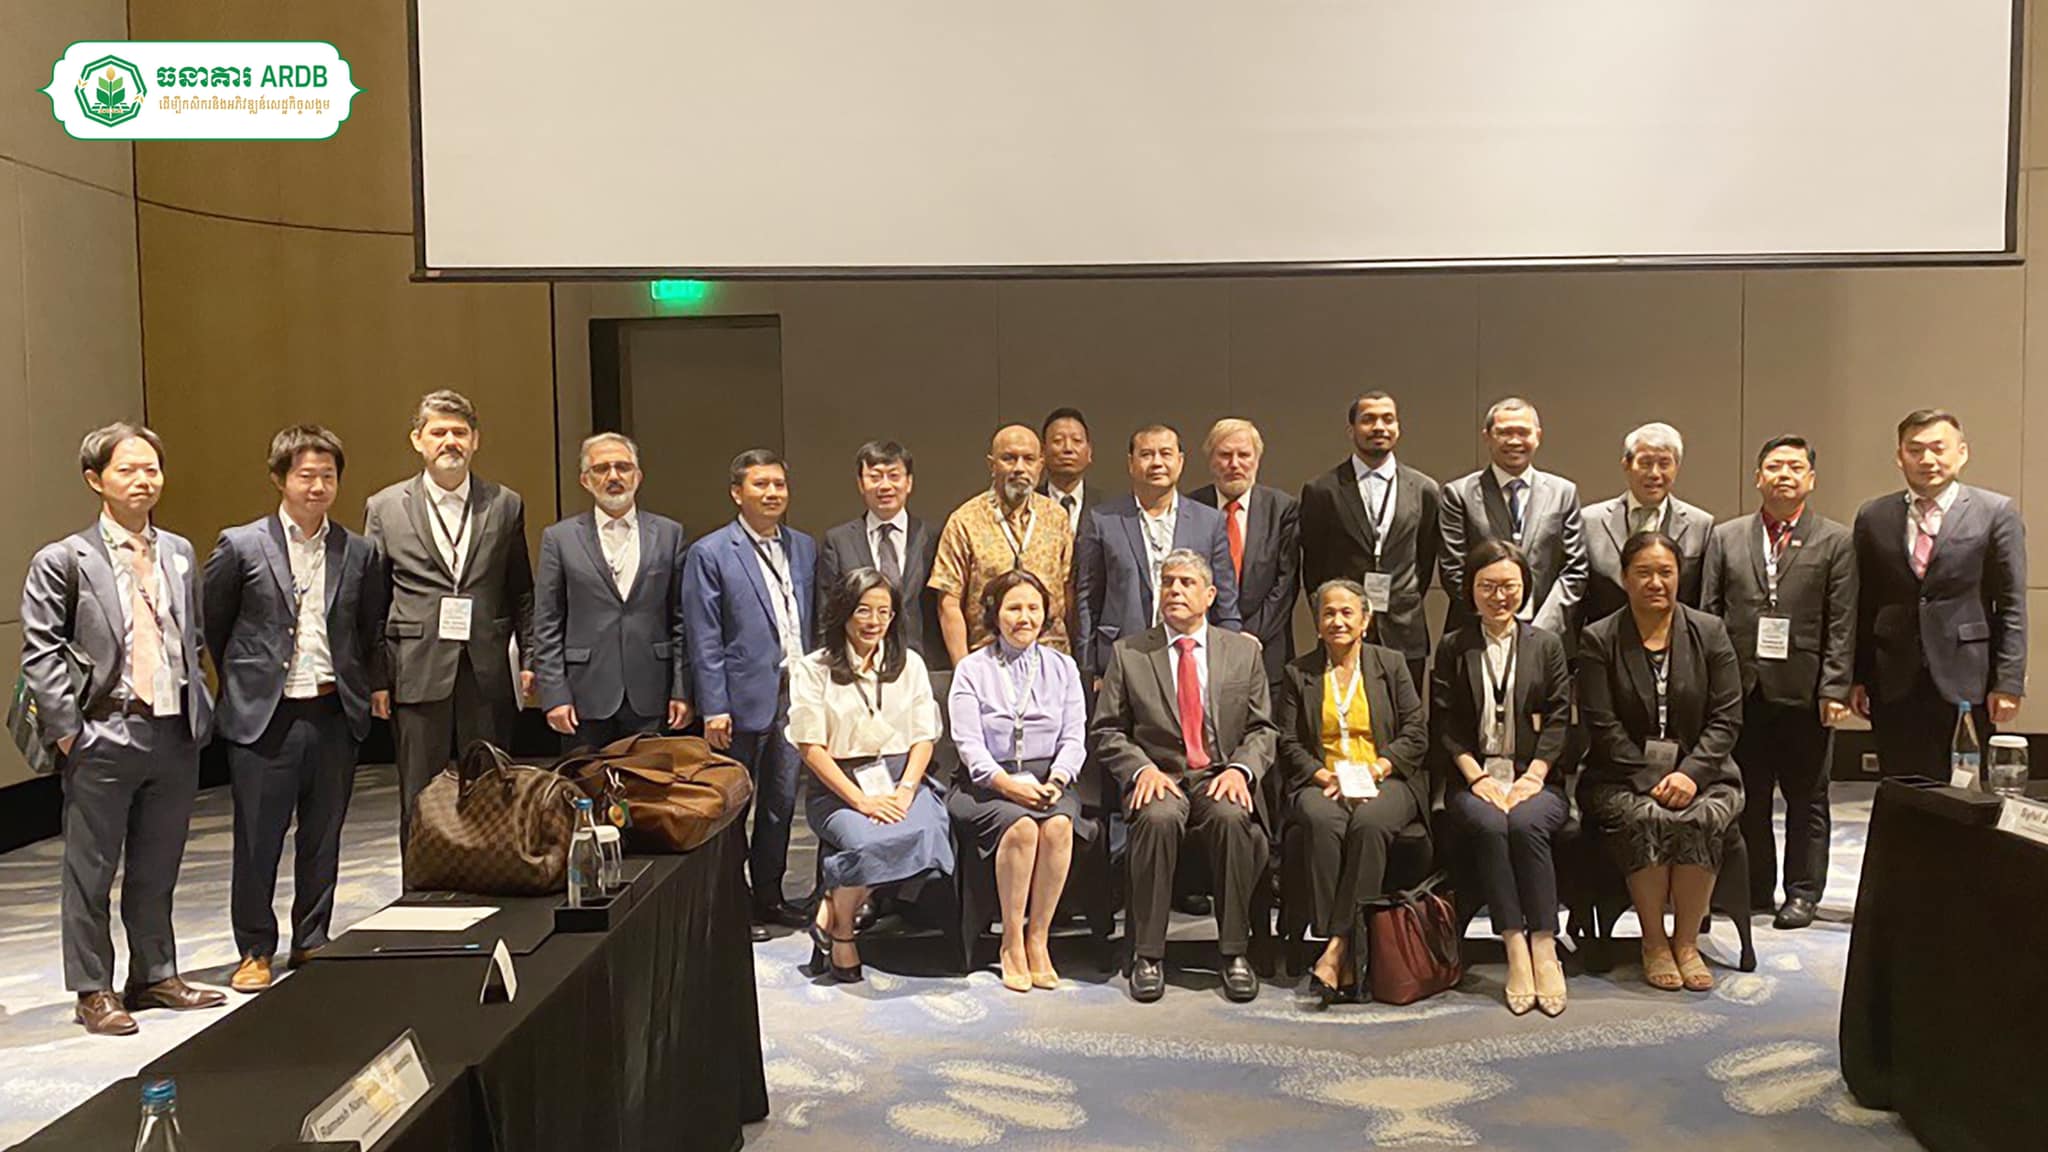 H.E. Dr. KAO Thach, as one of the ADFIAP Board of Director Members, accompanied by colleagues, have joined the 93rd ADFIAP Board of Directors Meeting